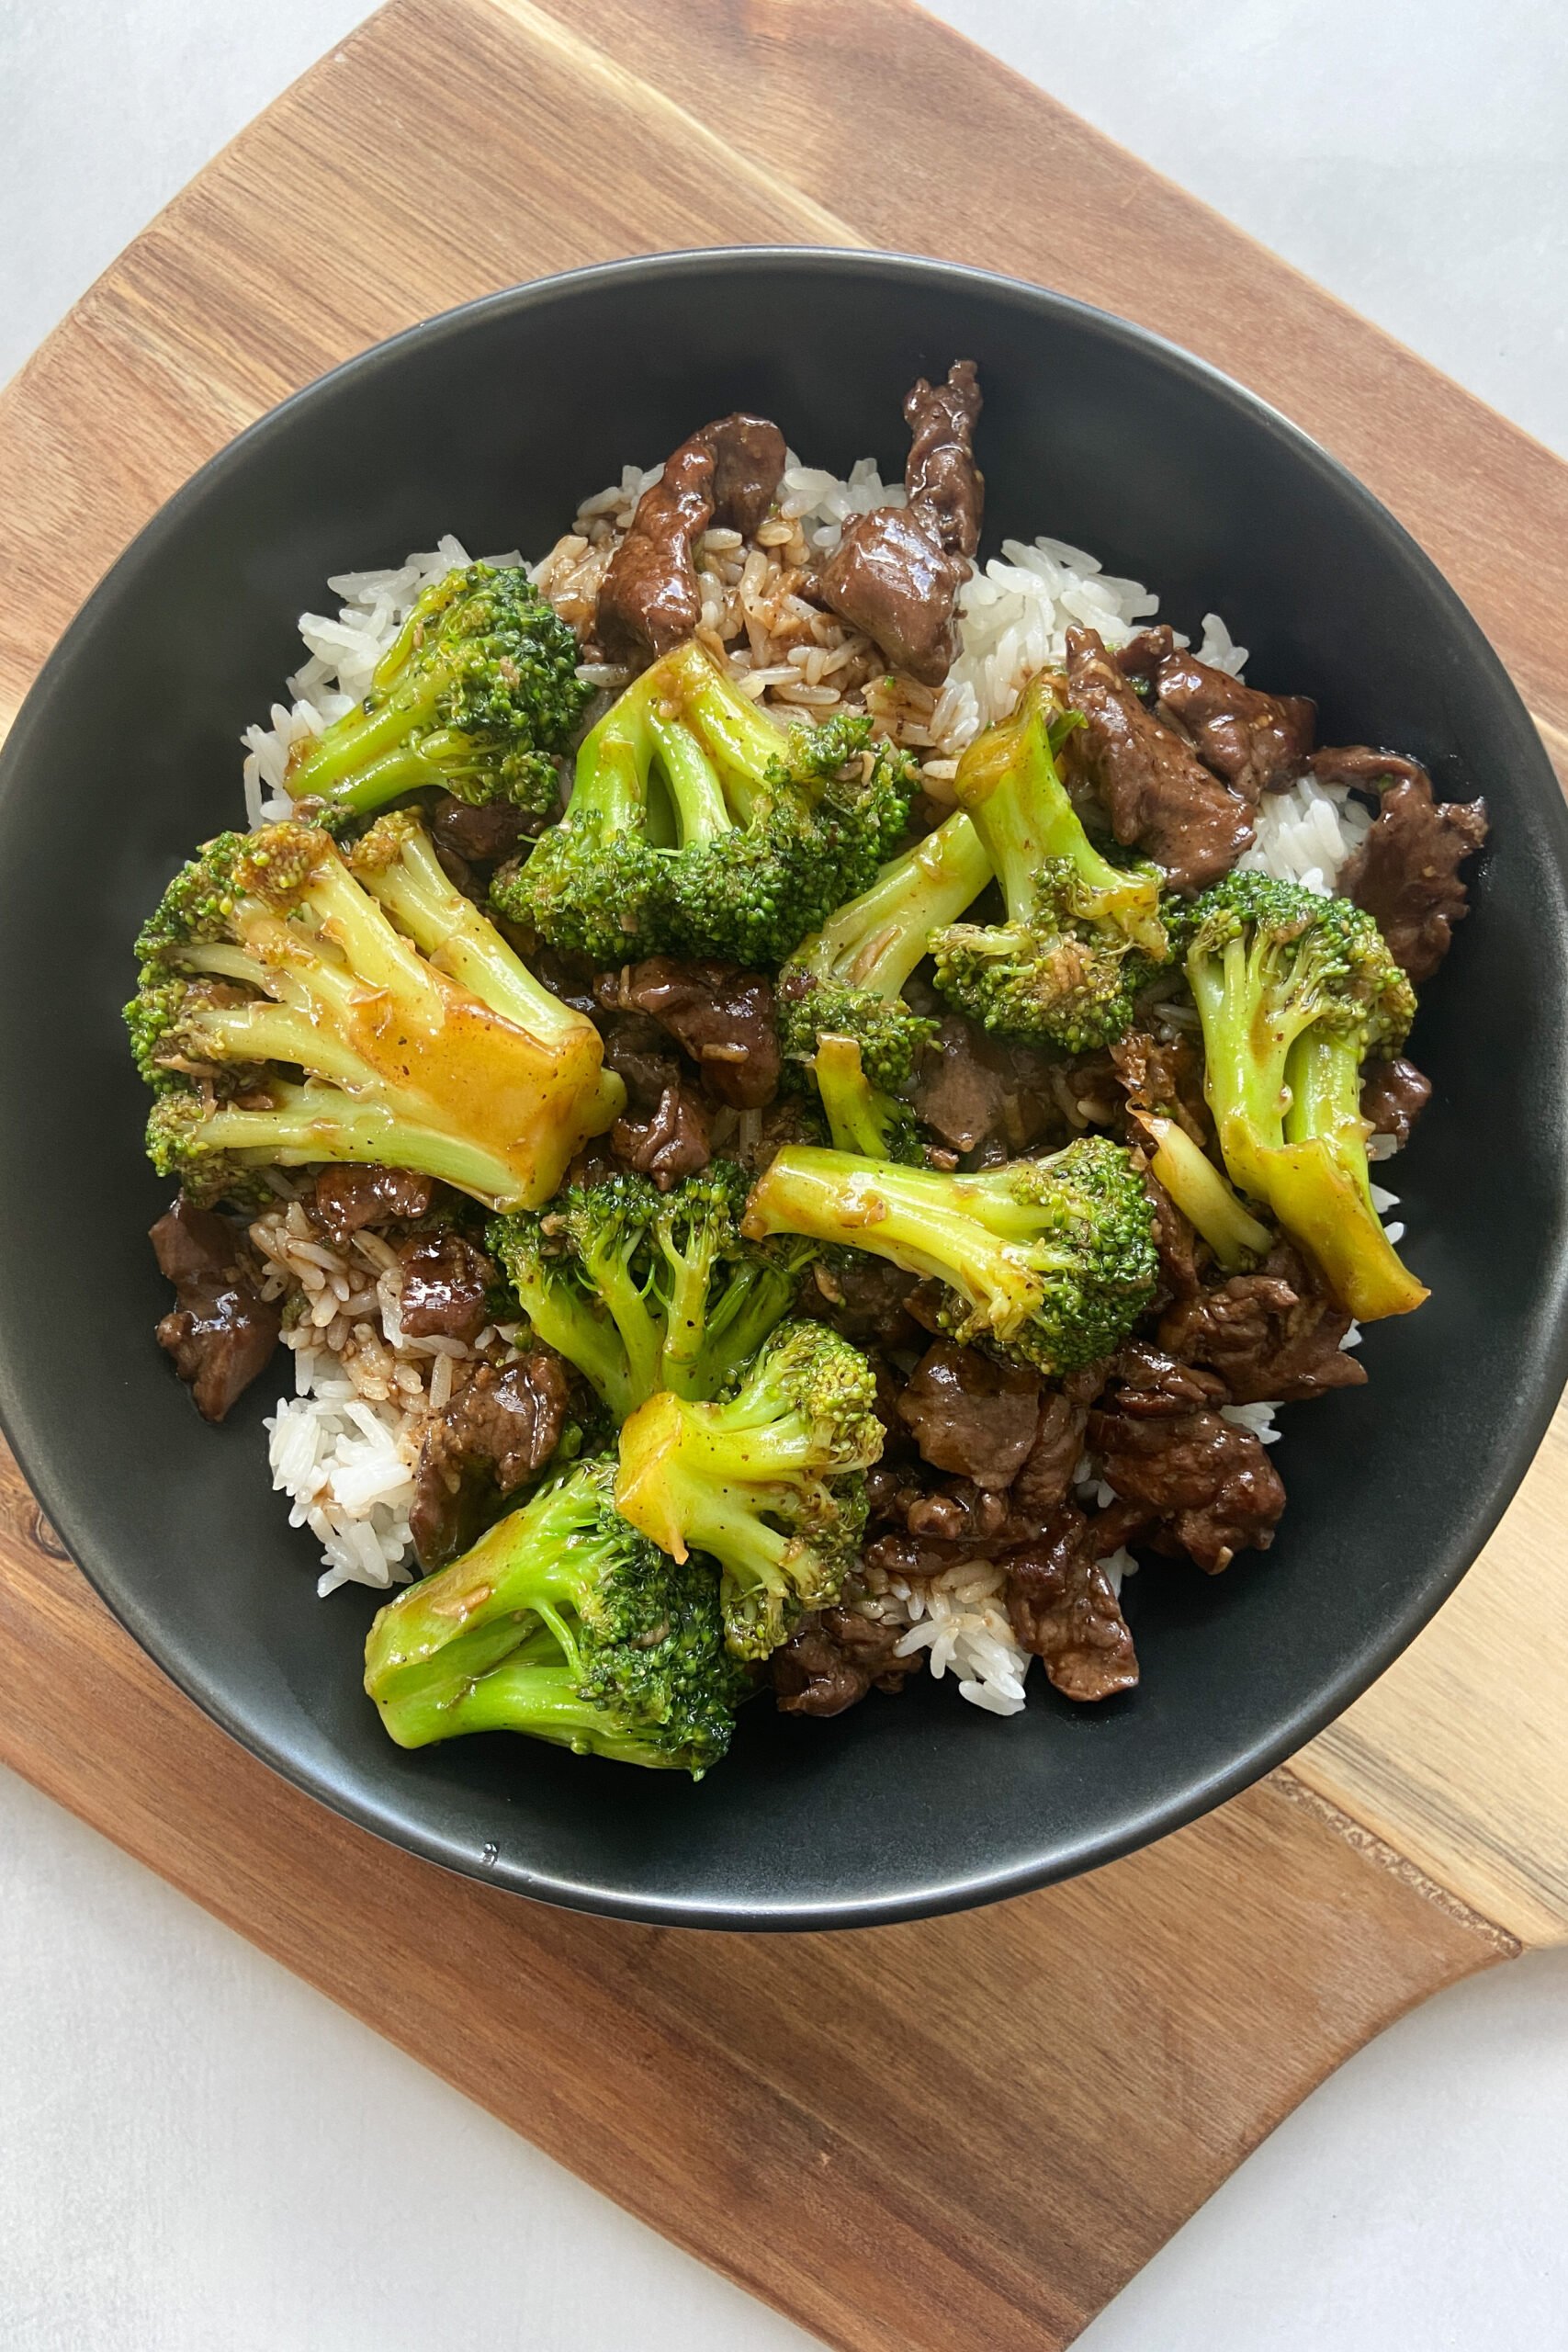 Beef and broccoli stir-fry served over white rice in a black plate.